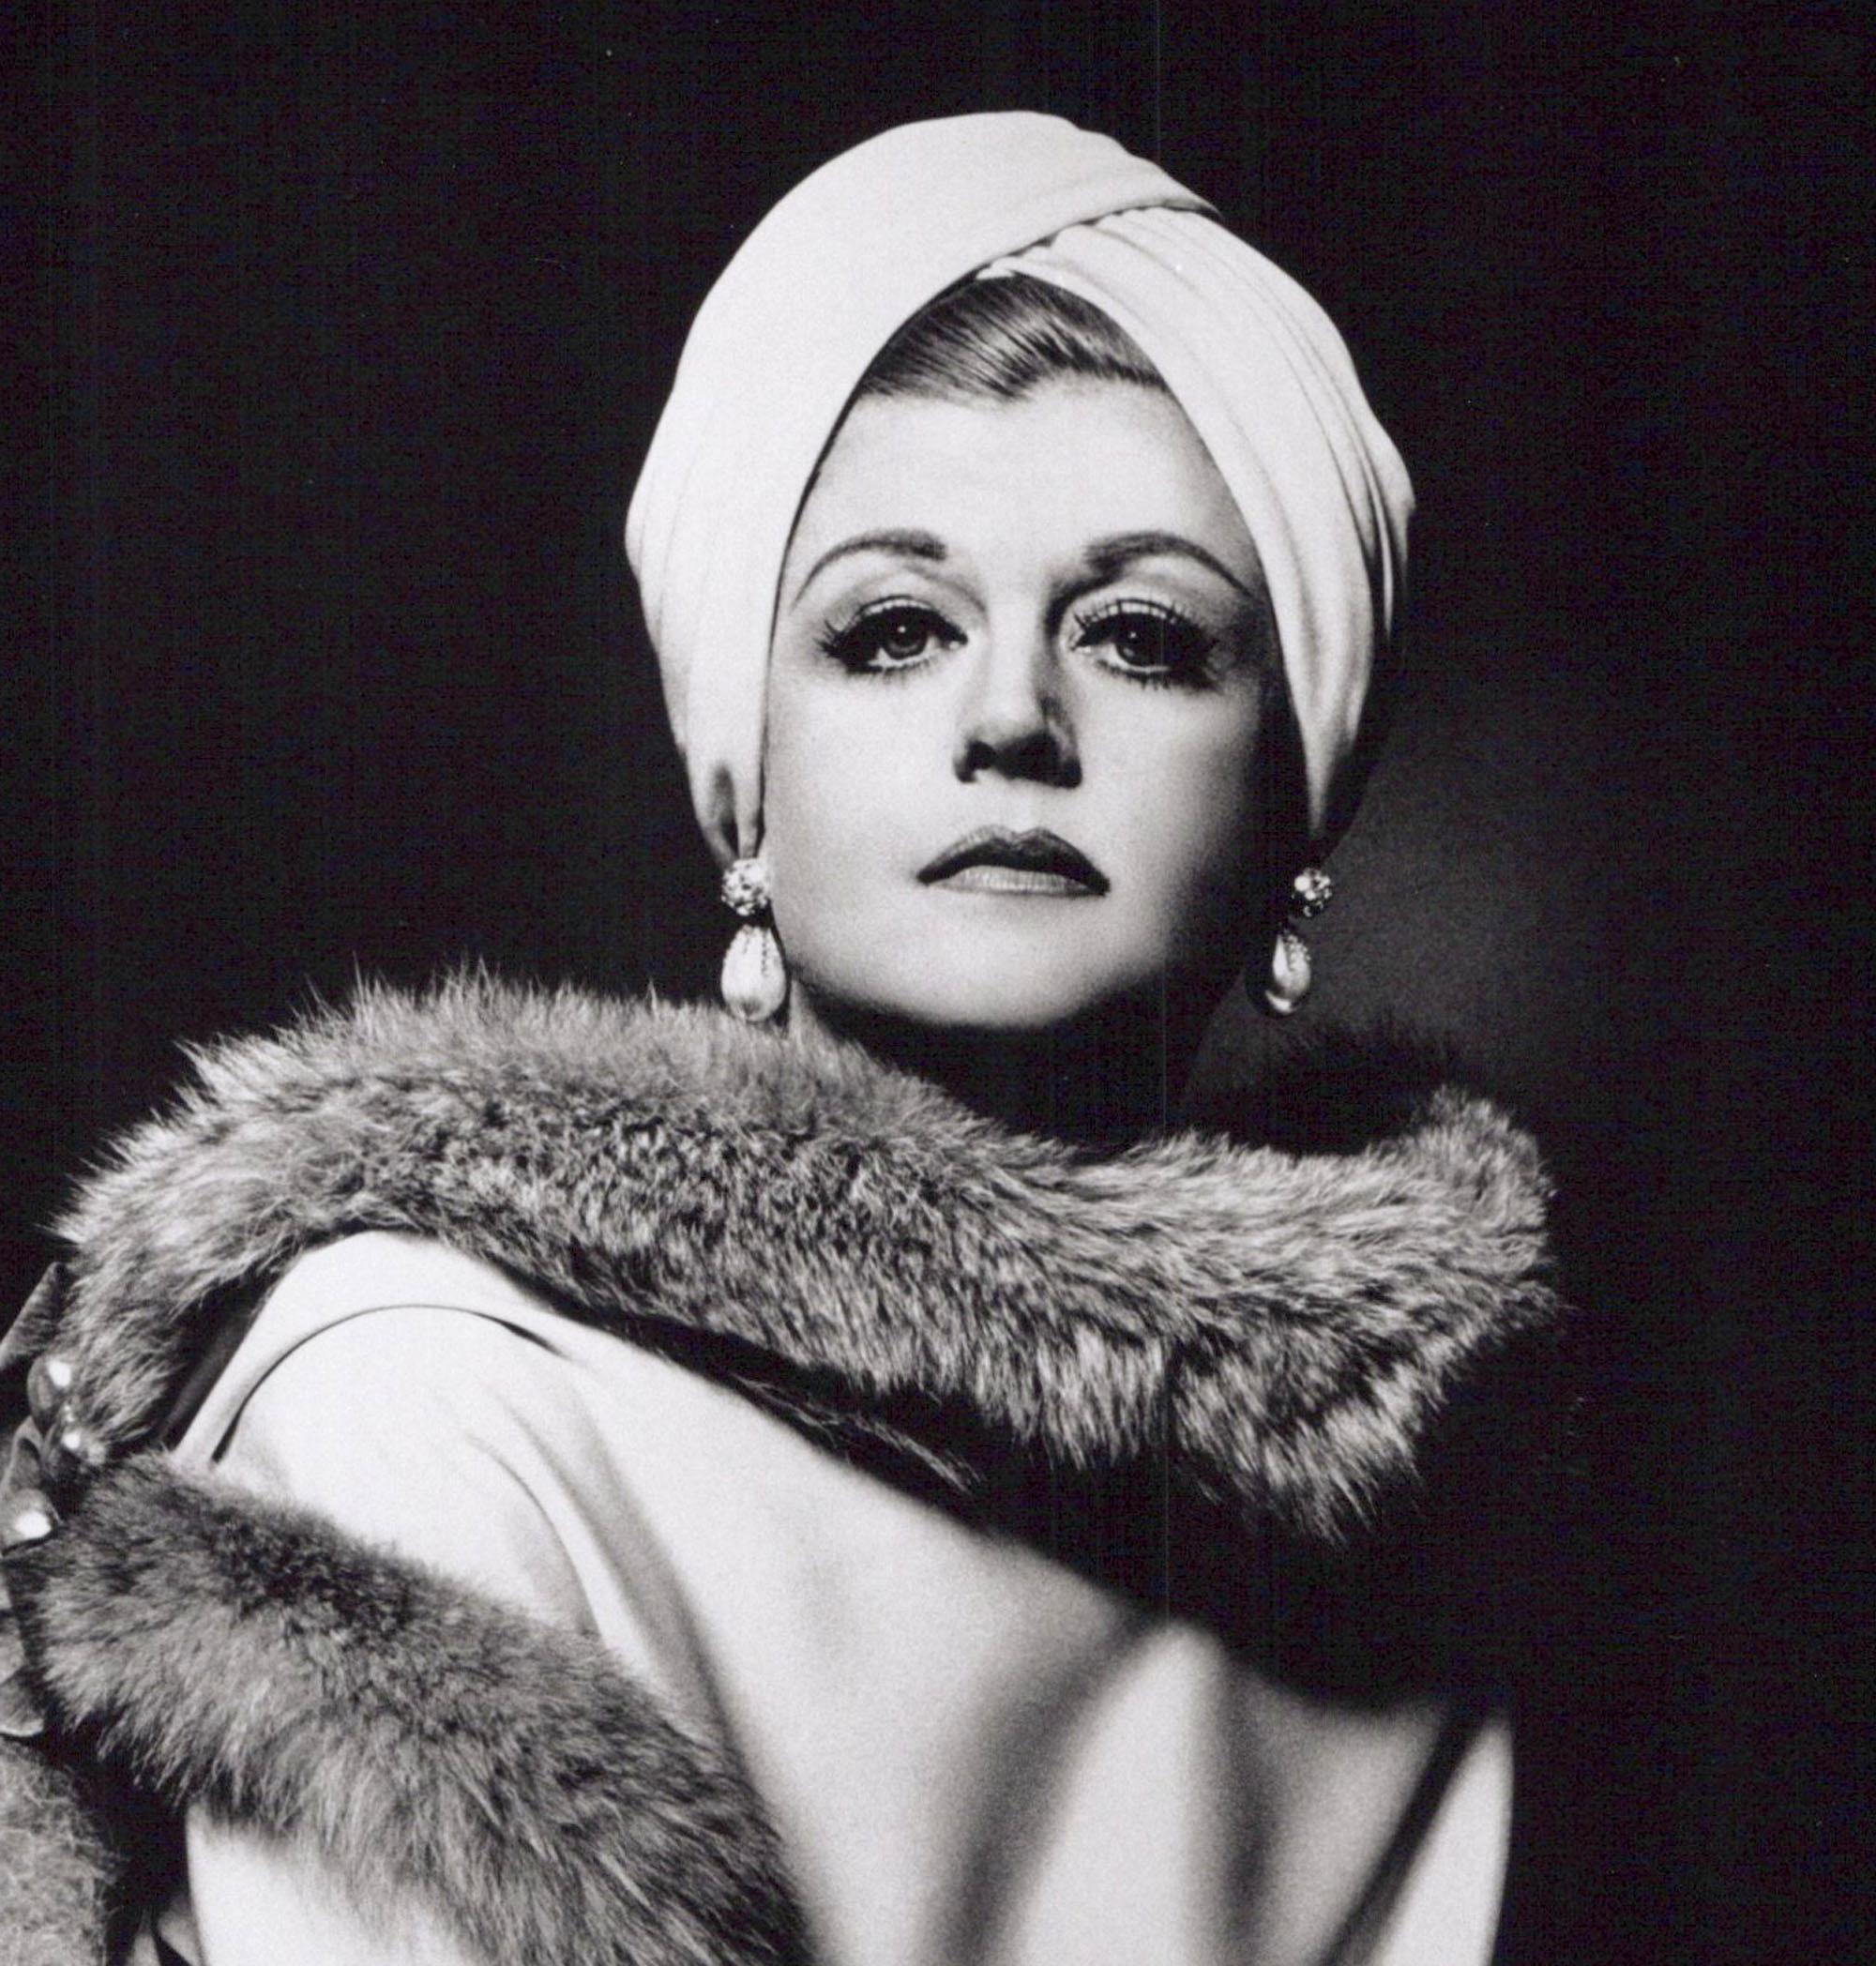 Angela Lansbury in full costume for her starring role on Broadway as 'Mame' - Photograph by Jack Mitchell